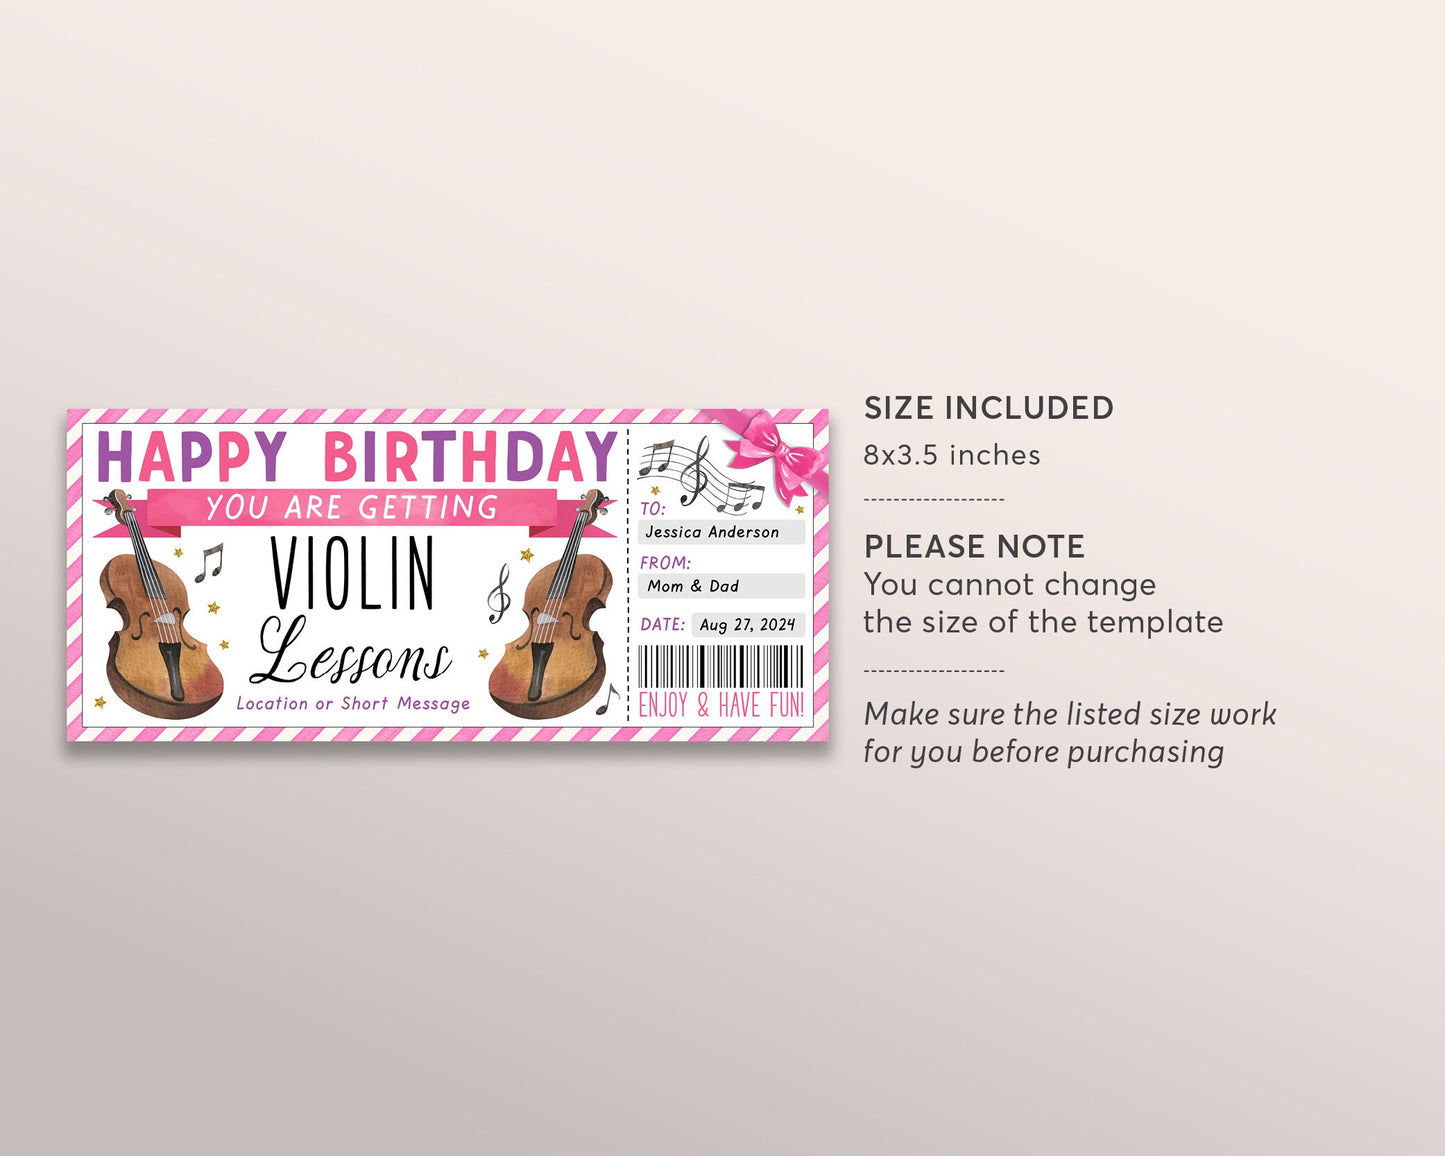 Violin Lessons Gift Certificate Editable Template, Birthday Surprise Music Violin Class Masterclass Gift Voucher Gift Reveal Coupon For Her